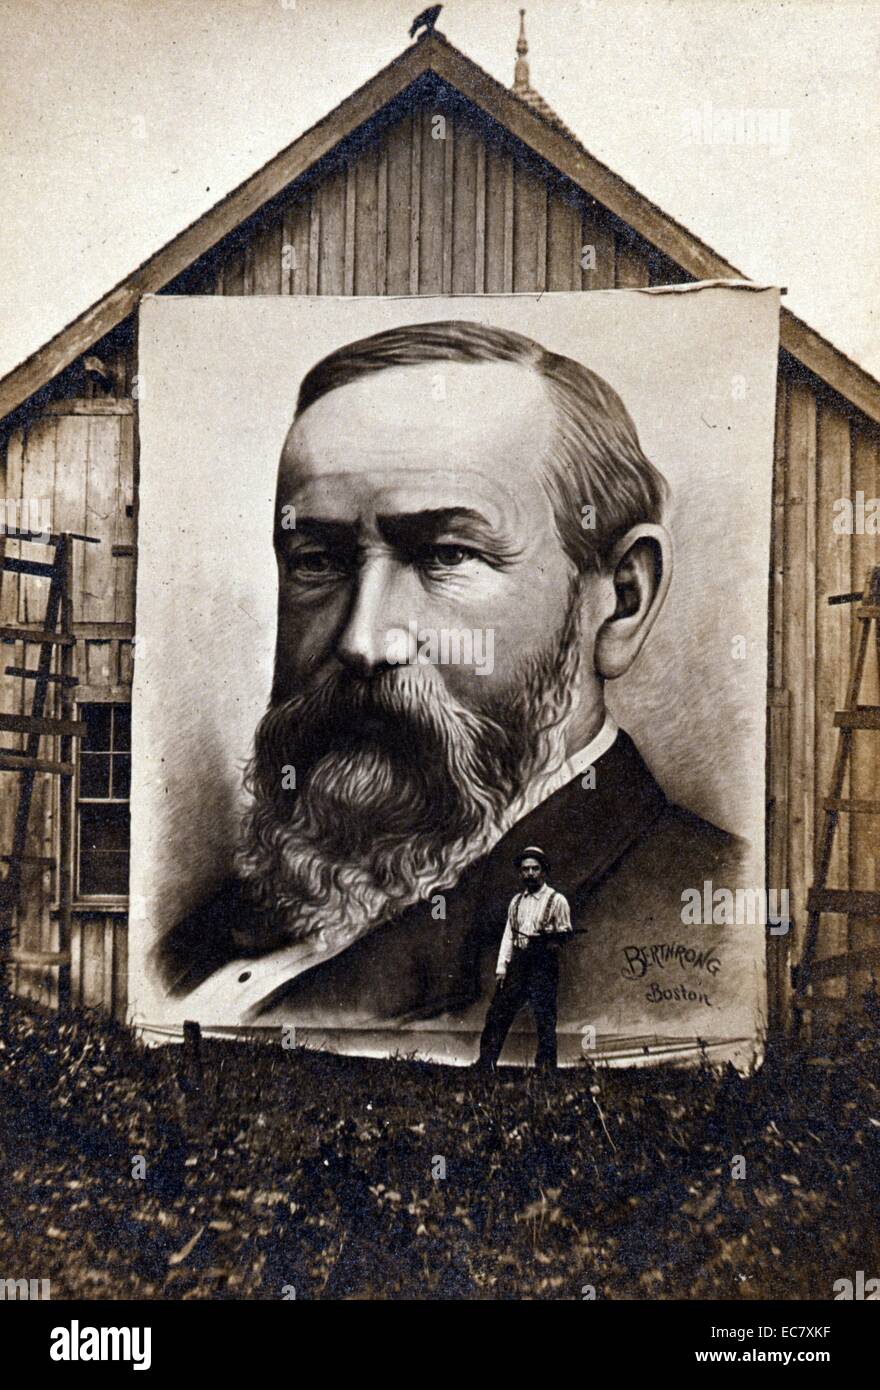 Painting of President Benjamin Harrison displayed on the side of a barn with the artist standing next to it. The artist signed the portrait 'Berthrong Boston.' Stock Photo